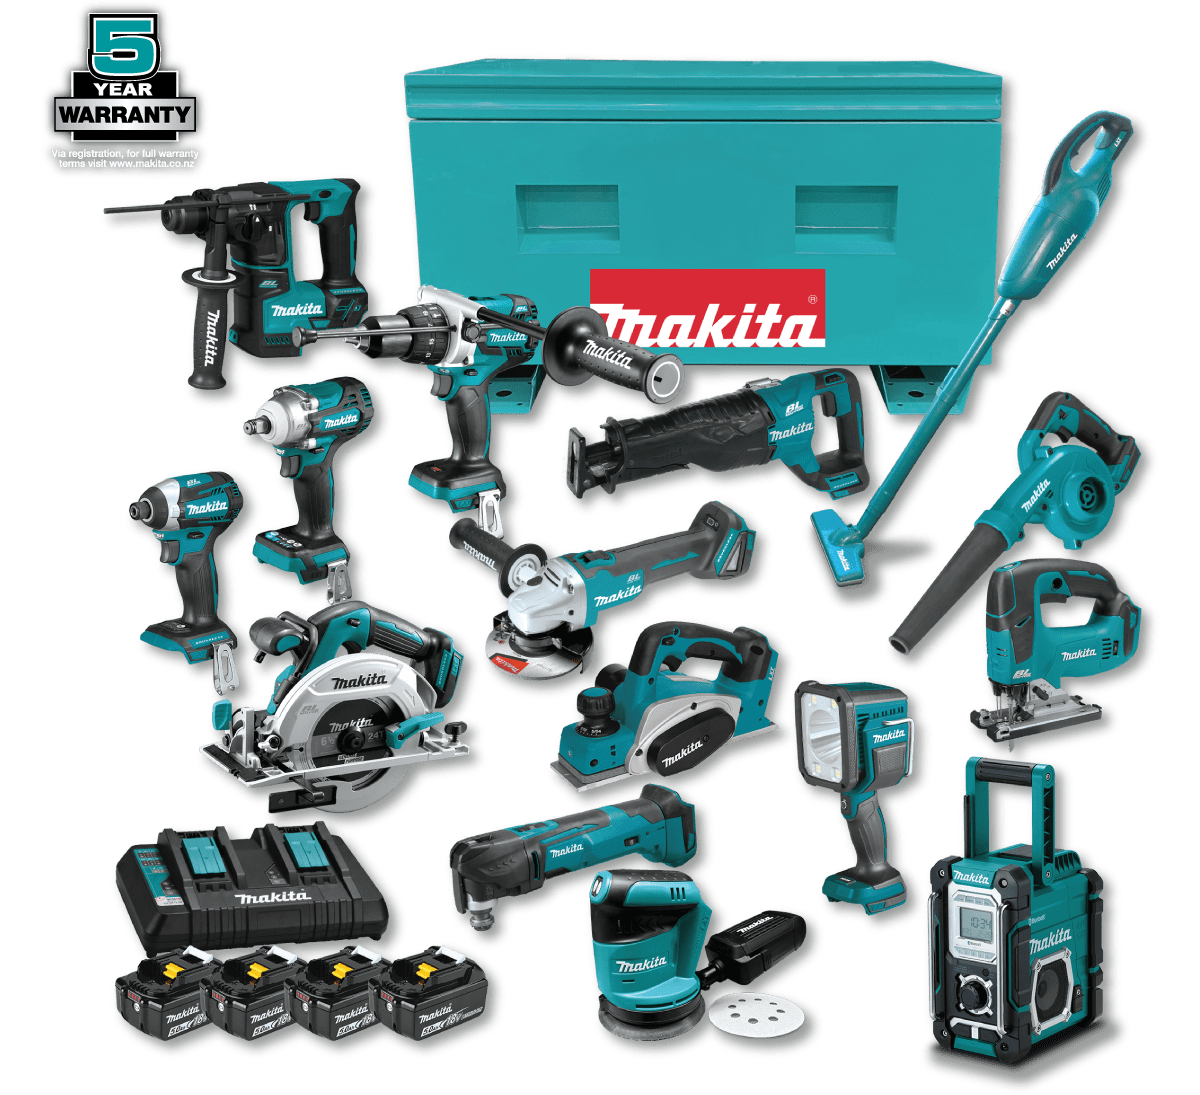 Makita Promotions Claim Your Tool Chest